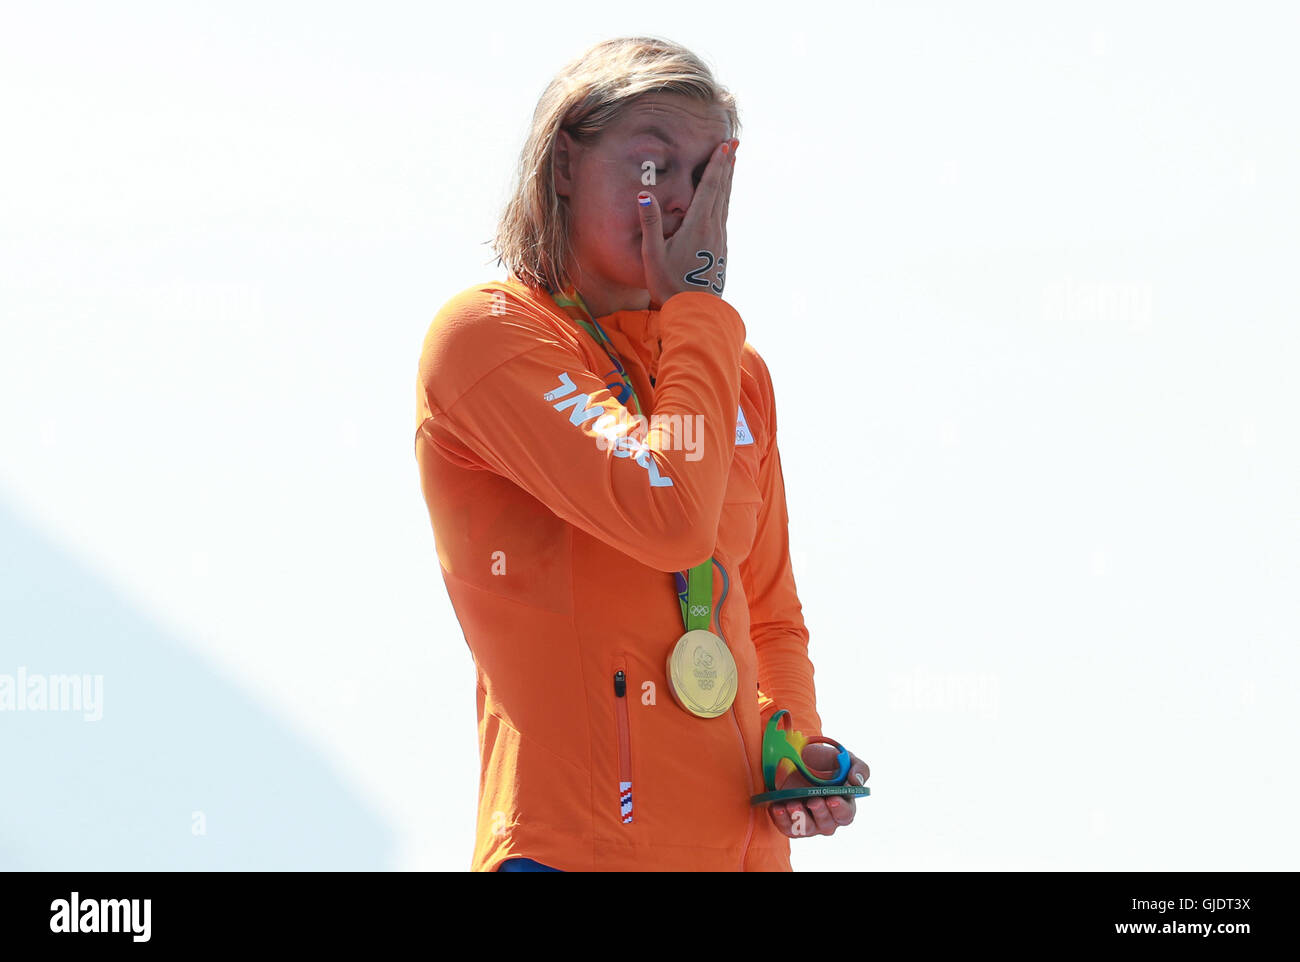 Rio de Janeiro, Brazil. 14th August, 2016. OLYMPICS 2016 OPEN WATER - gold medalist Sharon van Rouwendaal (NED), celebrates during the medal ceremony at the 10km Marathon Swimming women podium during the 2016 Olympics held in the Forte de Copacabana, Copacabana Beach. Credit:  Foto Arena LTDA/Alamy Live News Stock Photo